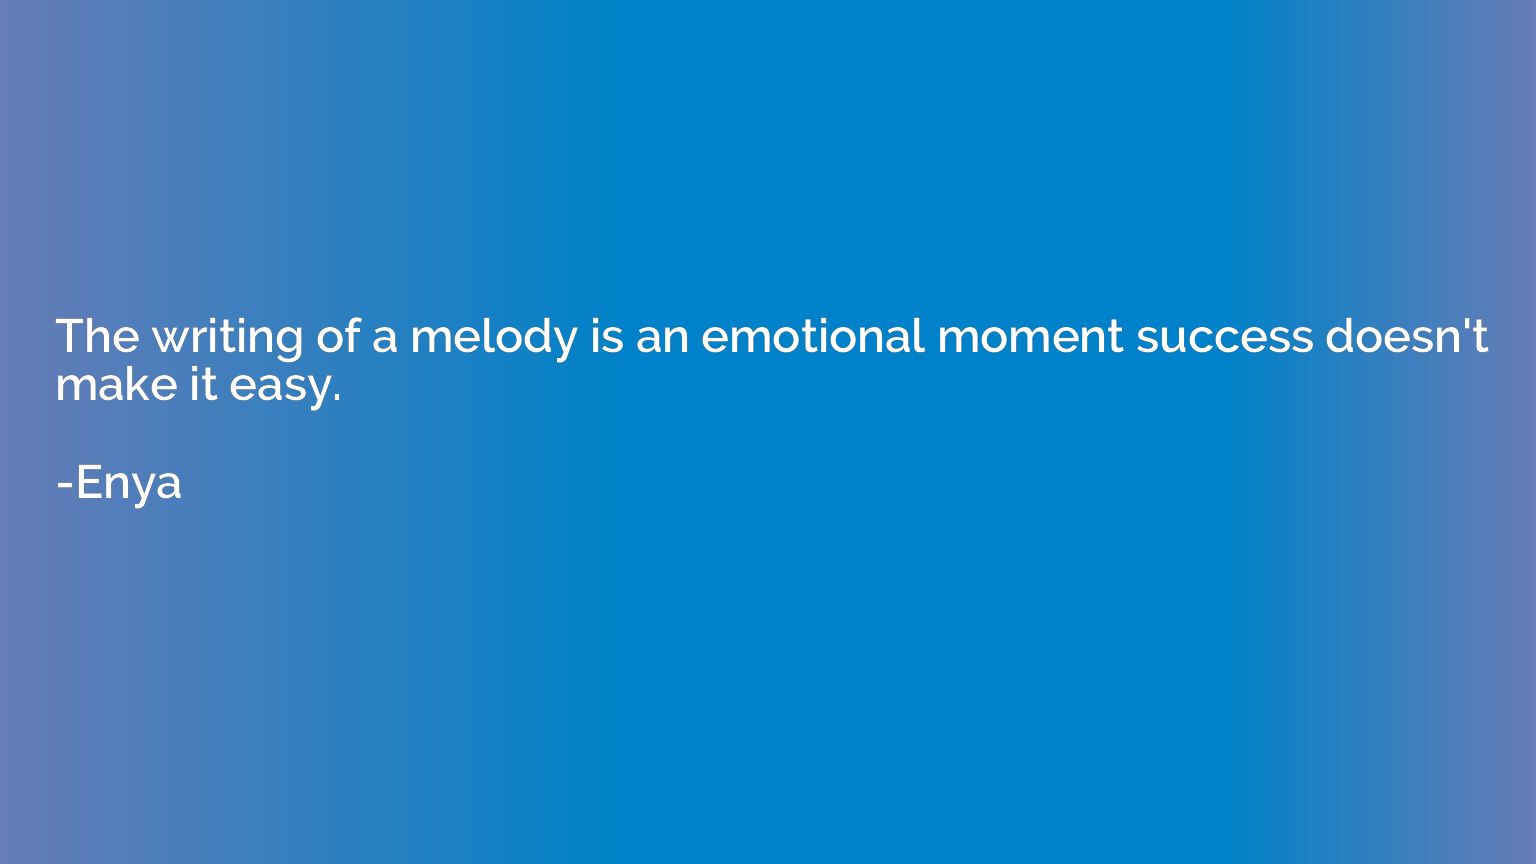 The writing of a melody is an emotional moment success doesn